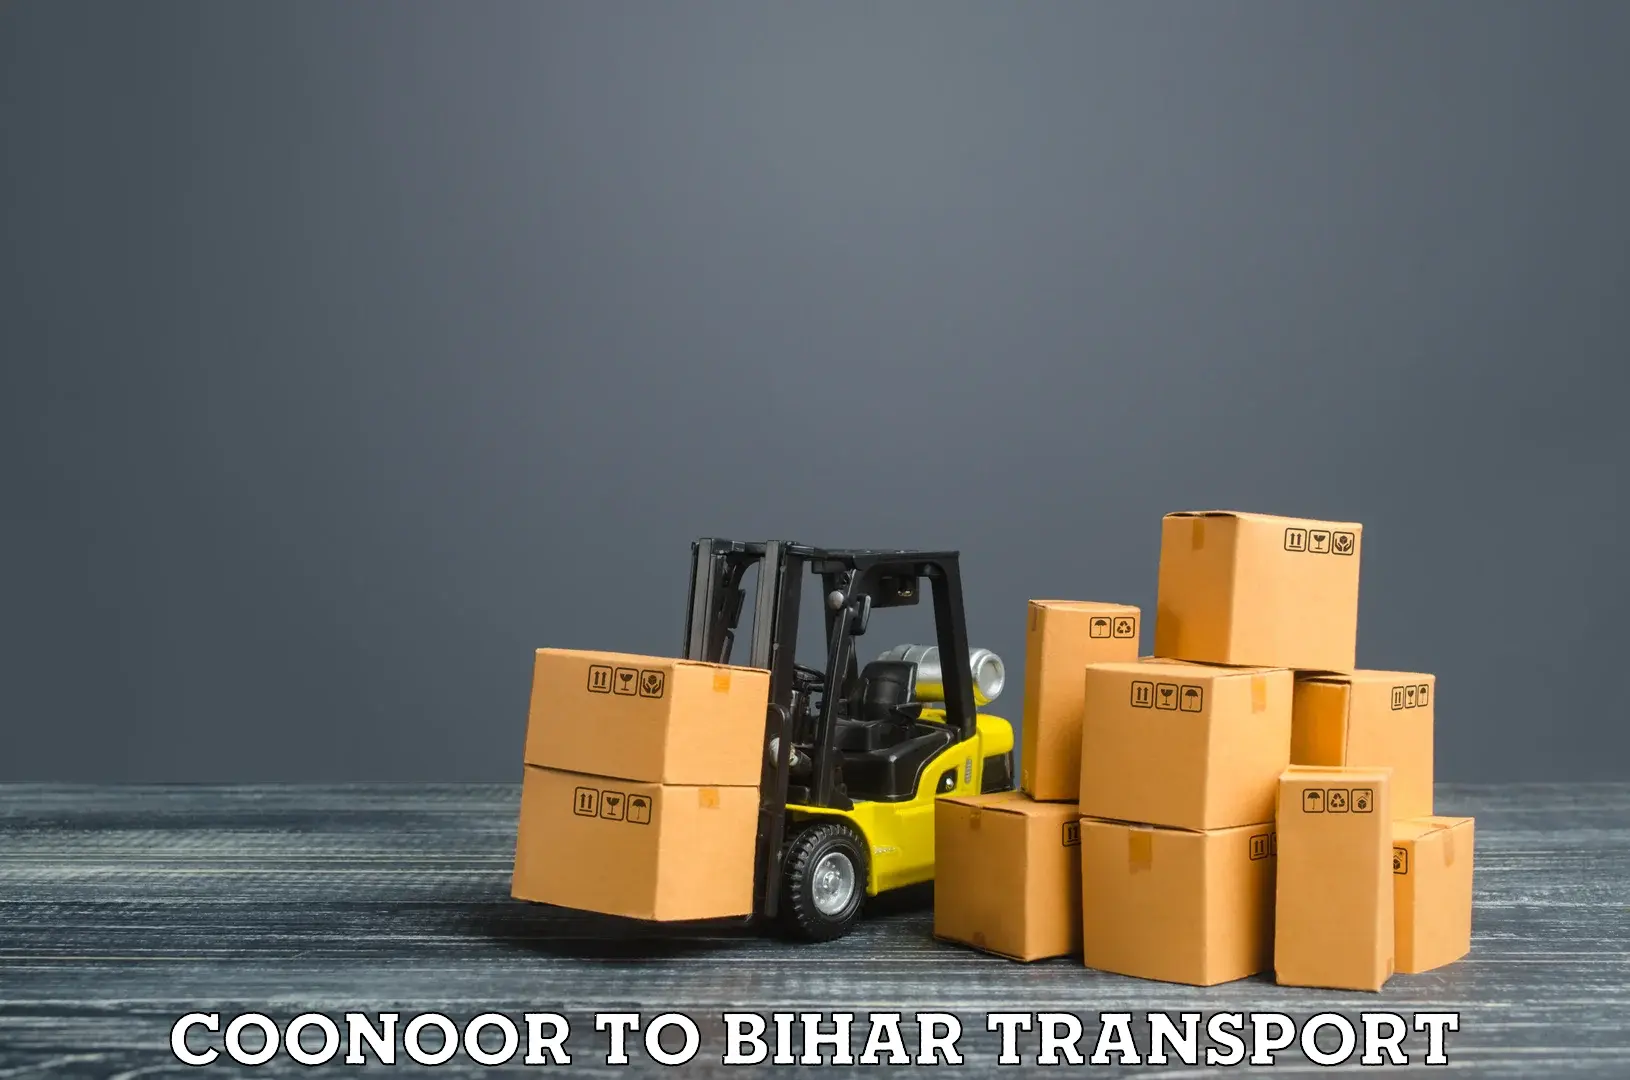 Container transport service Coonoor to Baniapur